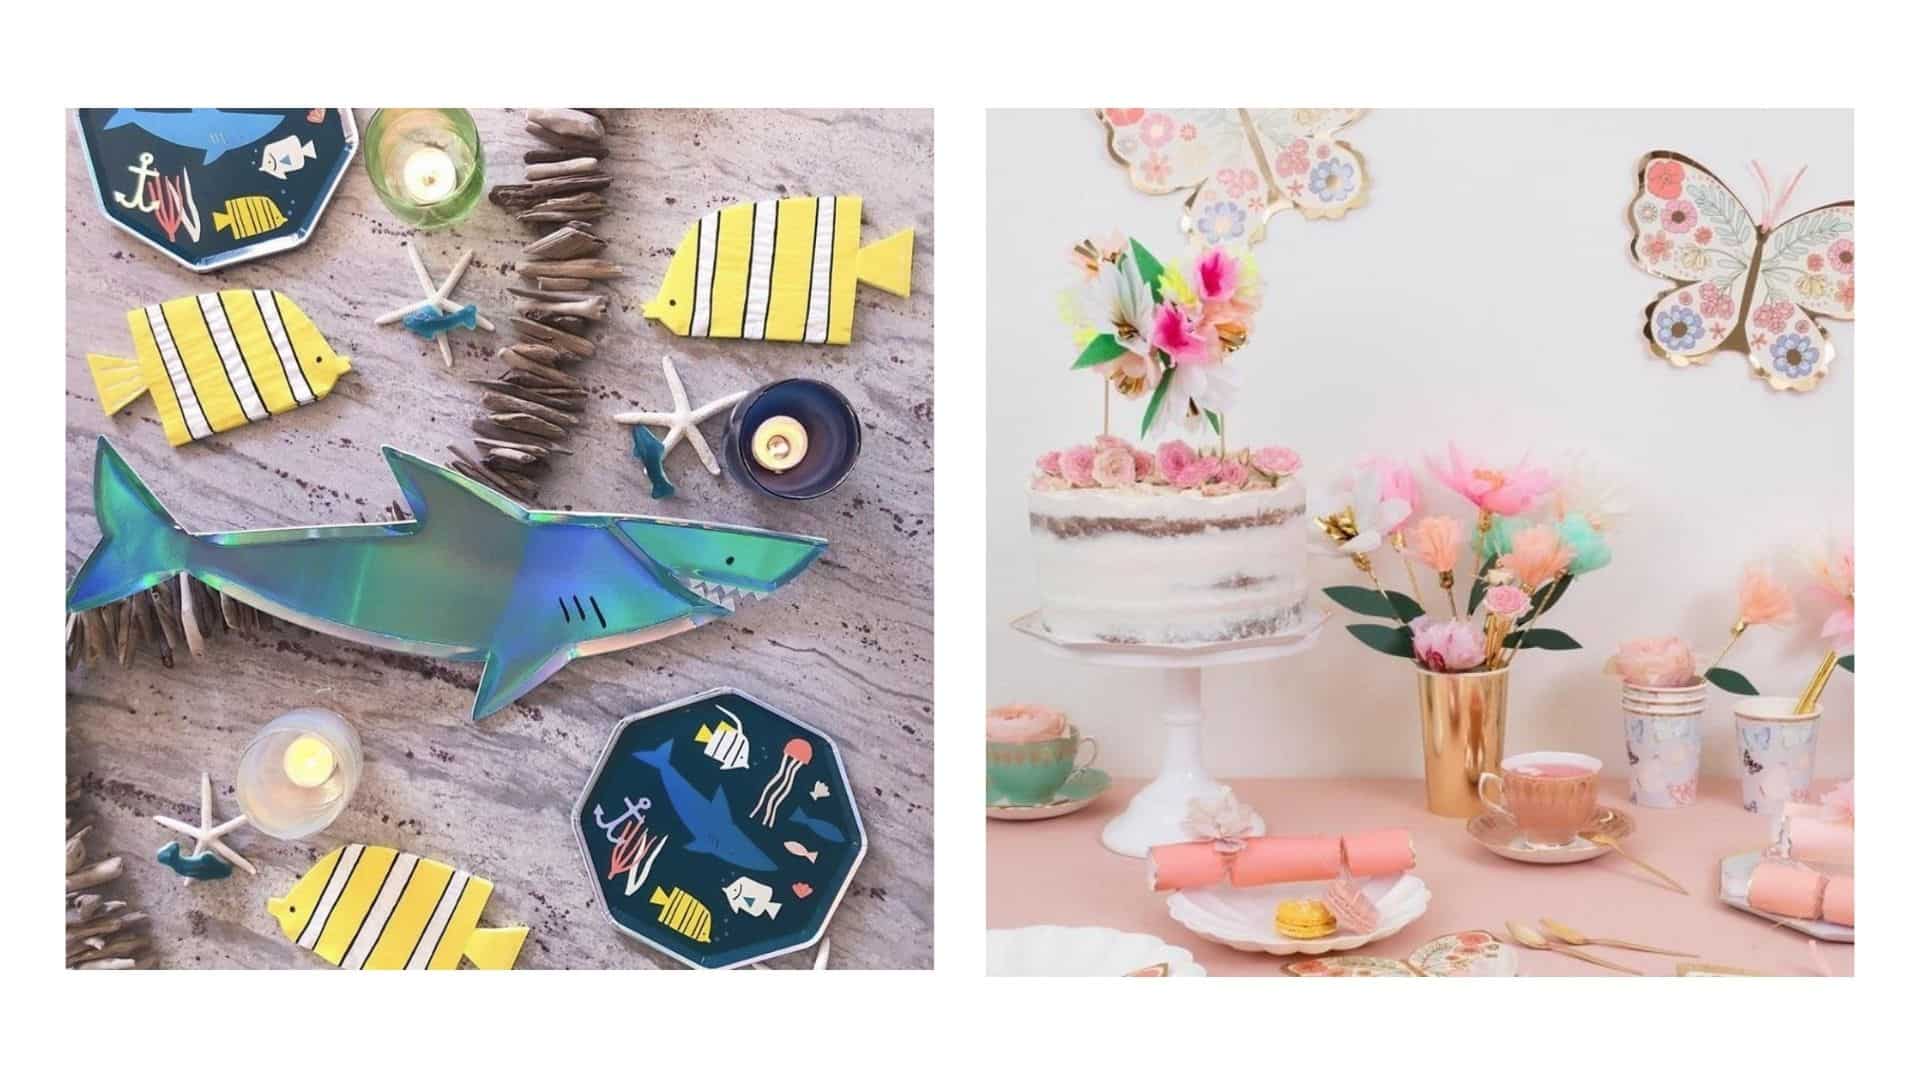 Examples of different themed birthday party decorations, including sharks and butterflies.